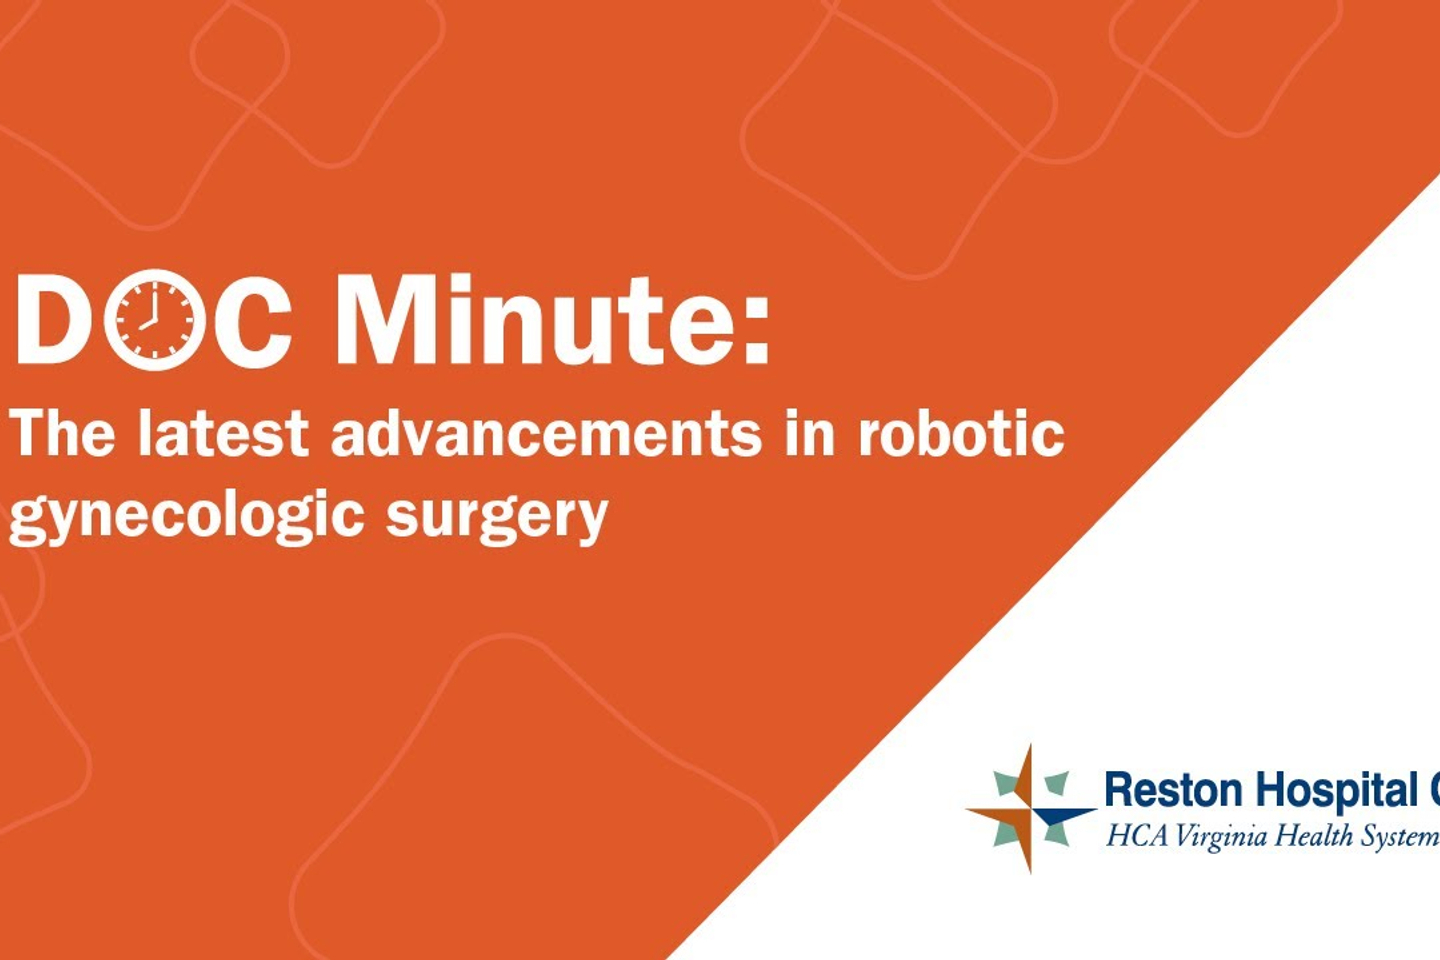 Doc Minute: The latest advancements in robotic gynecologic surgery